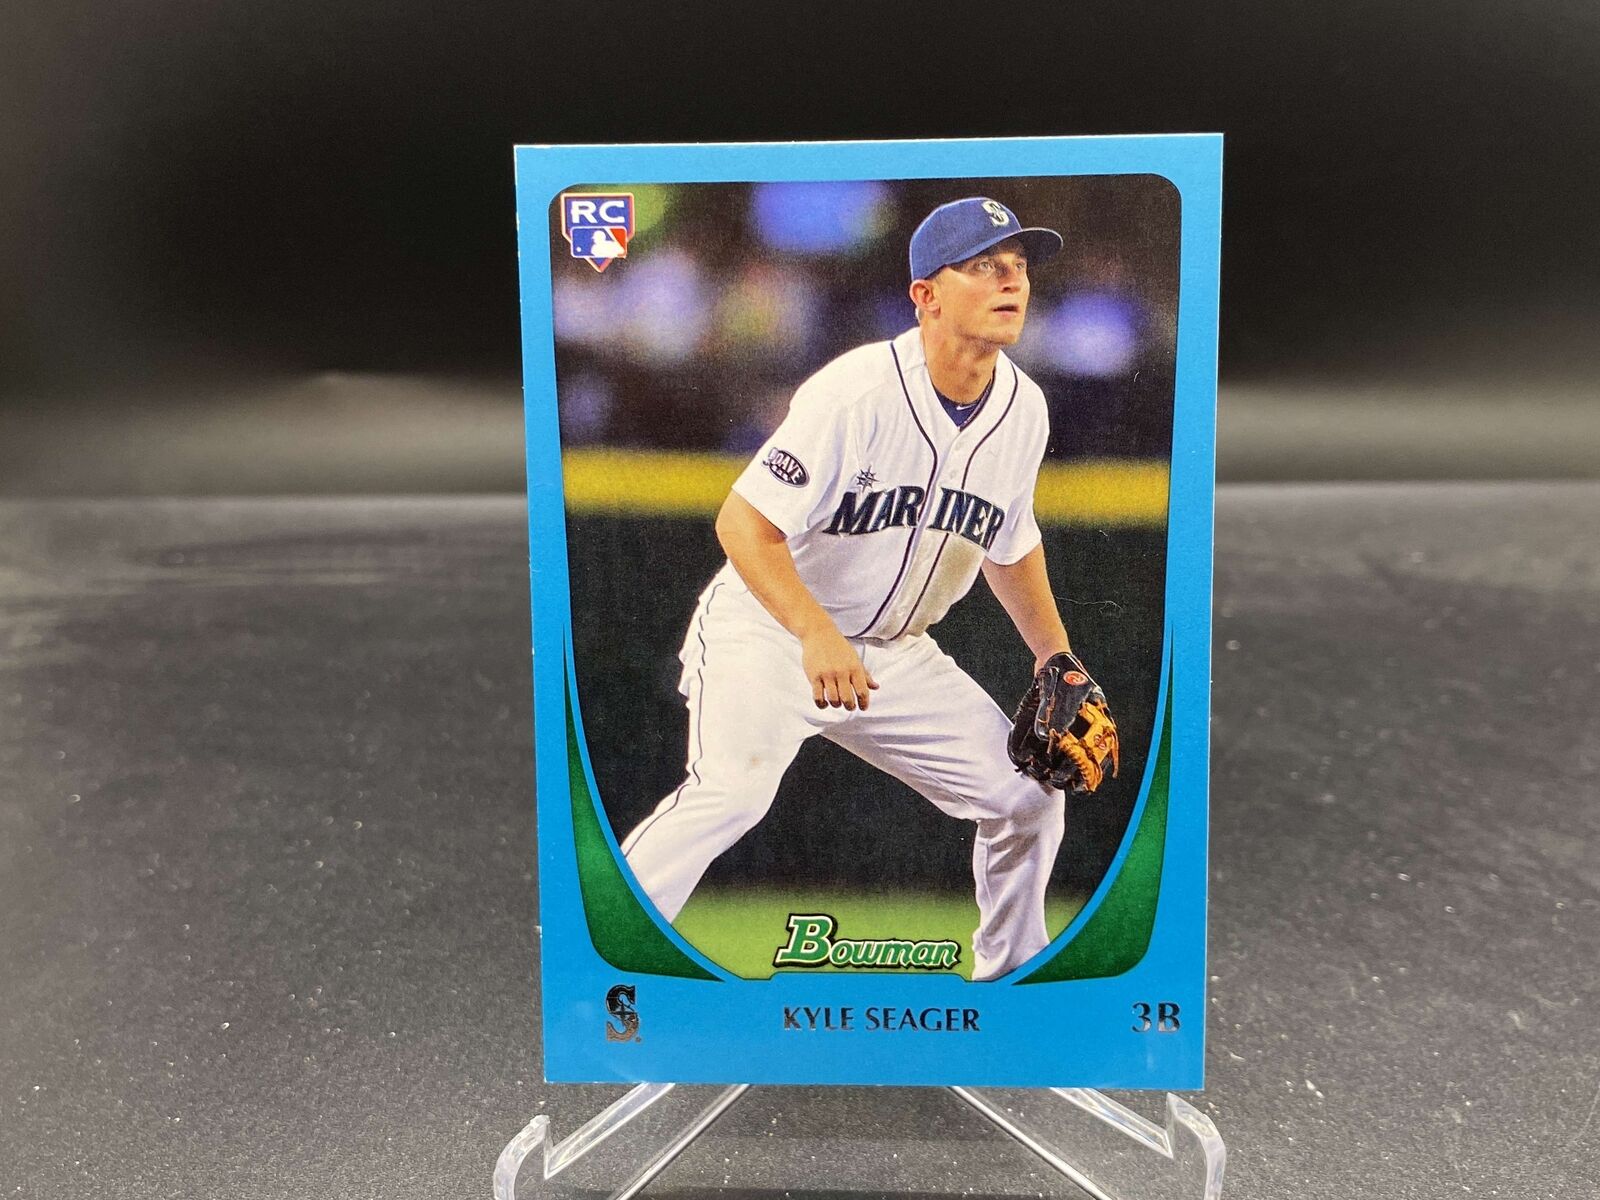 Kyle Seager 2011 Bowman Blue #103 /499 Mariners RC Rookie EX